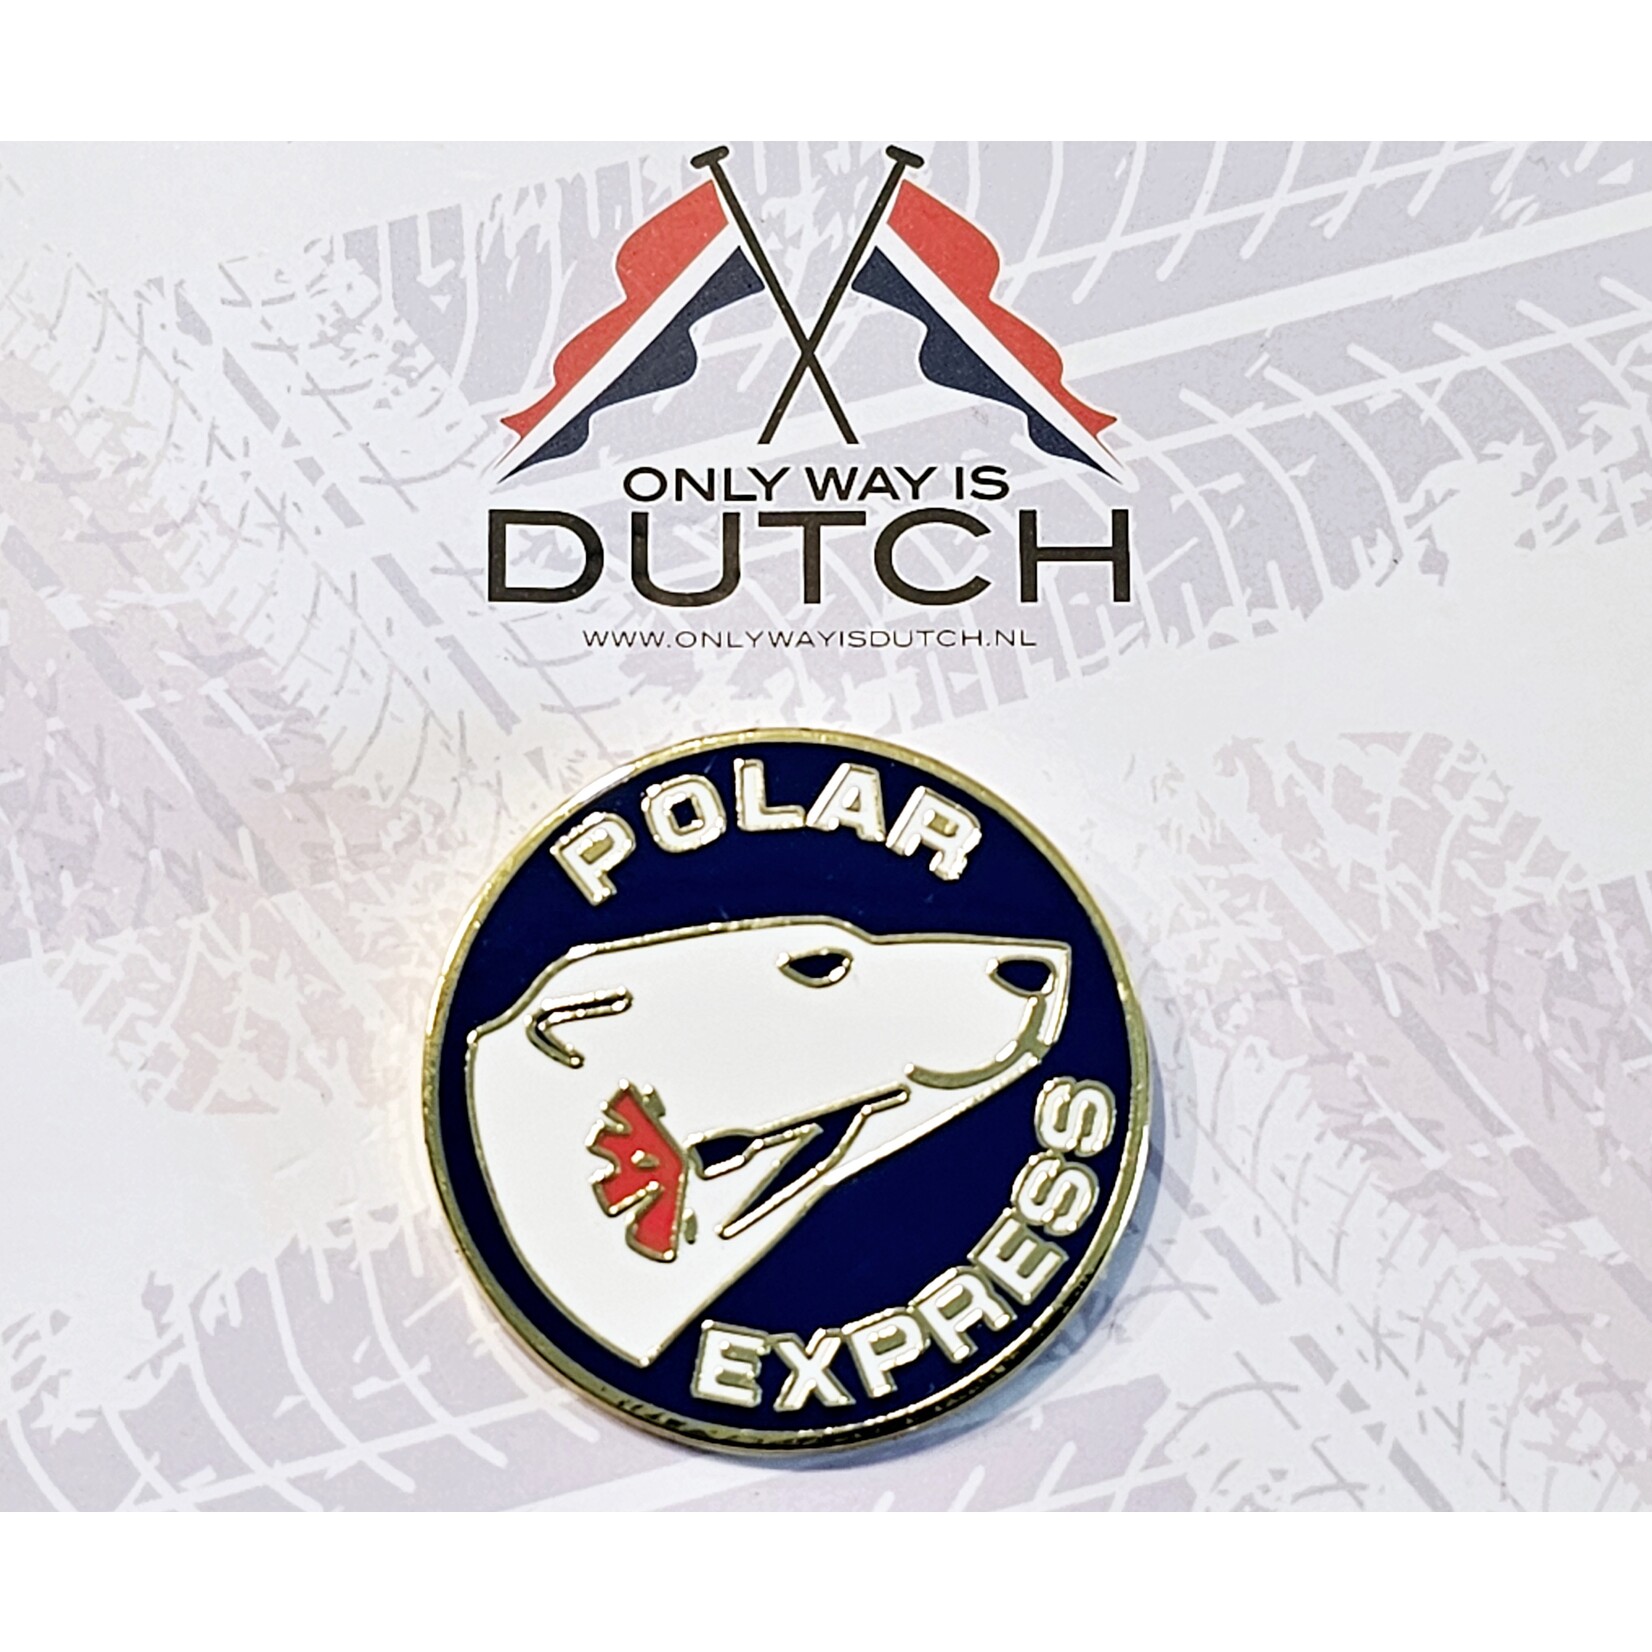 ONLY WAY IS DUTCH Only Way Is Dutch Pin - Polar Express